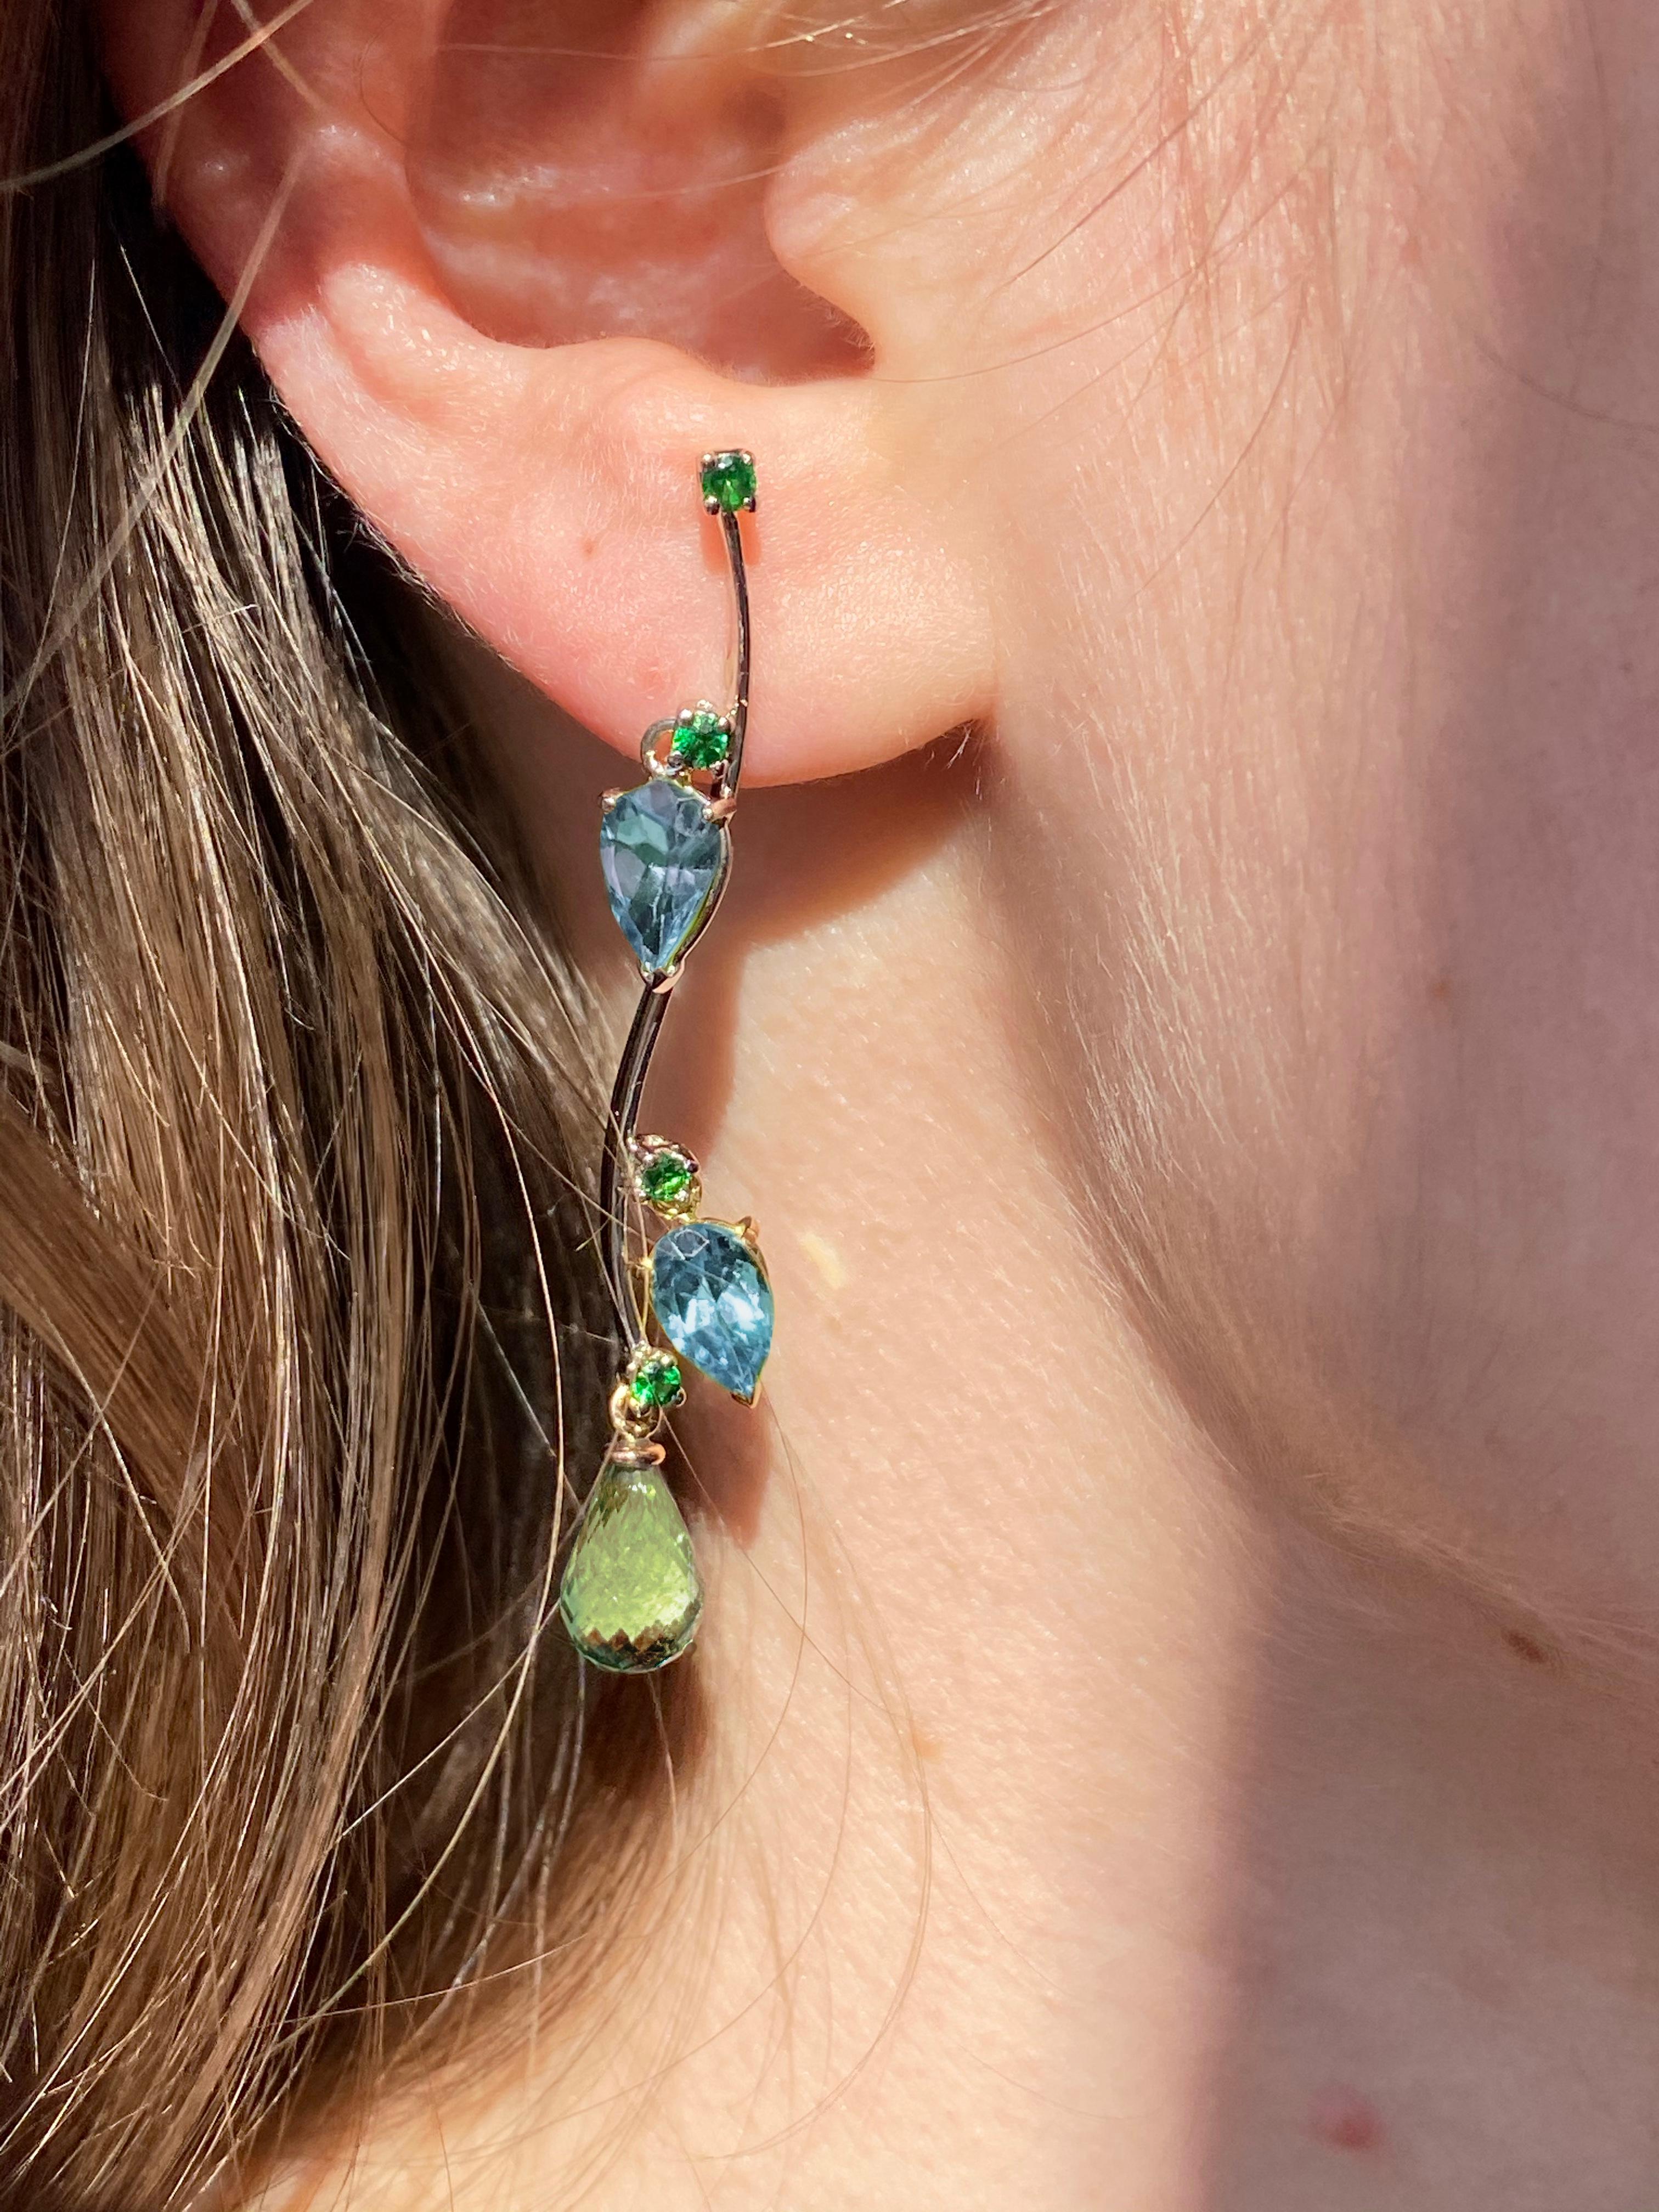 Rossella Ugolini Design Collection a Modern Style dangle Earrings Handcrafted in 18 Karats Gold with shade of blue and green colors:  Blue Topaz pear cut,  Tsavorite round cut , light green Tourmaline briolet drops.  The branches of the trees of